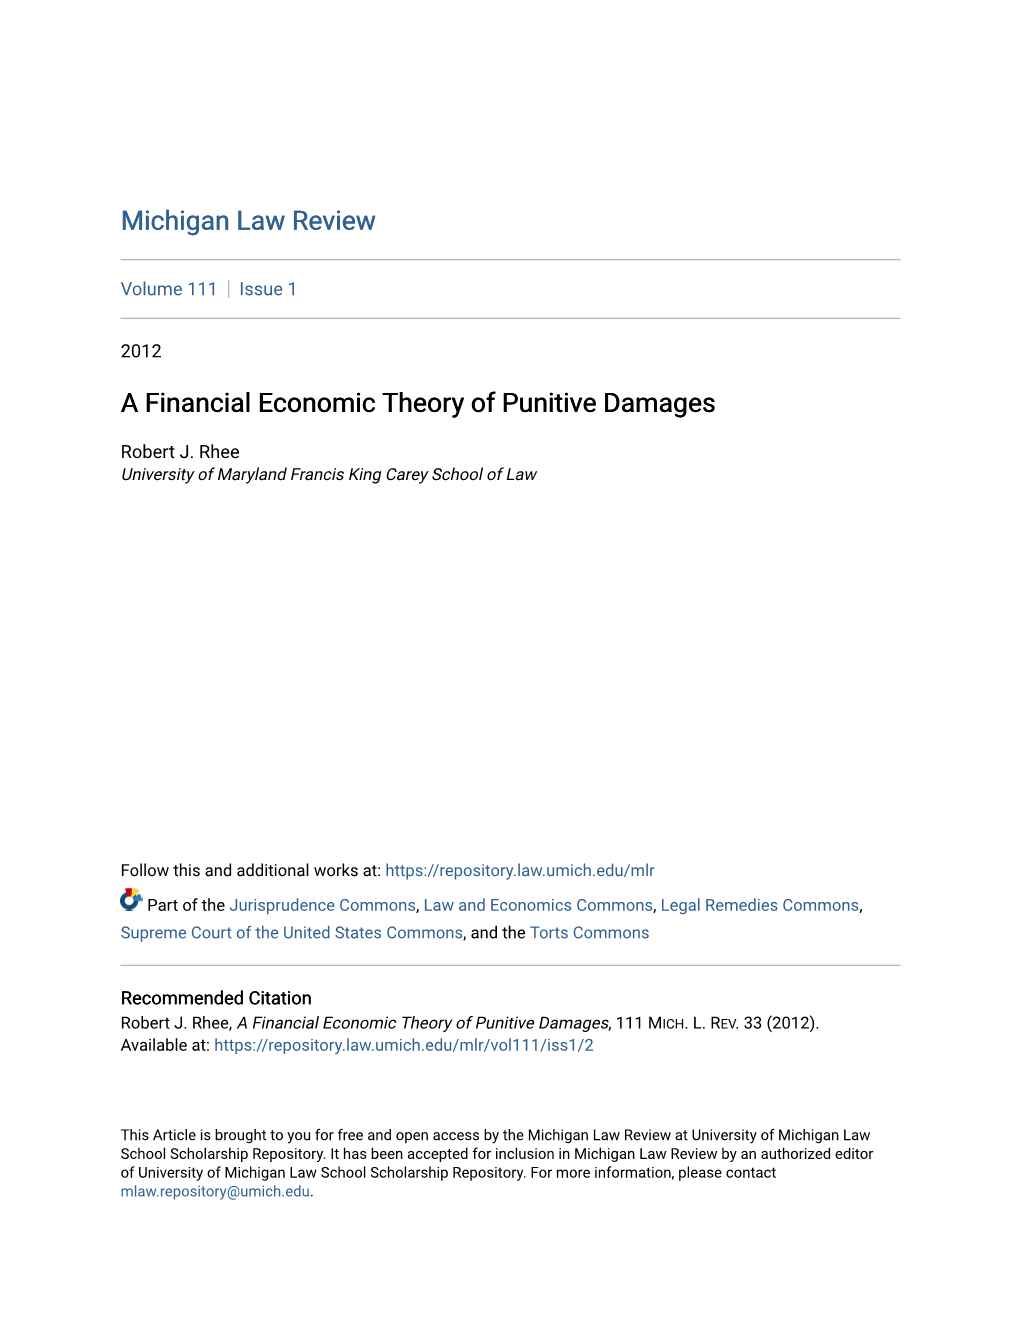 A Financial Economic Theory of Punitive Damages